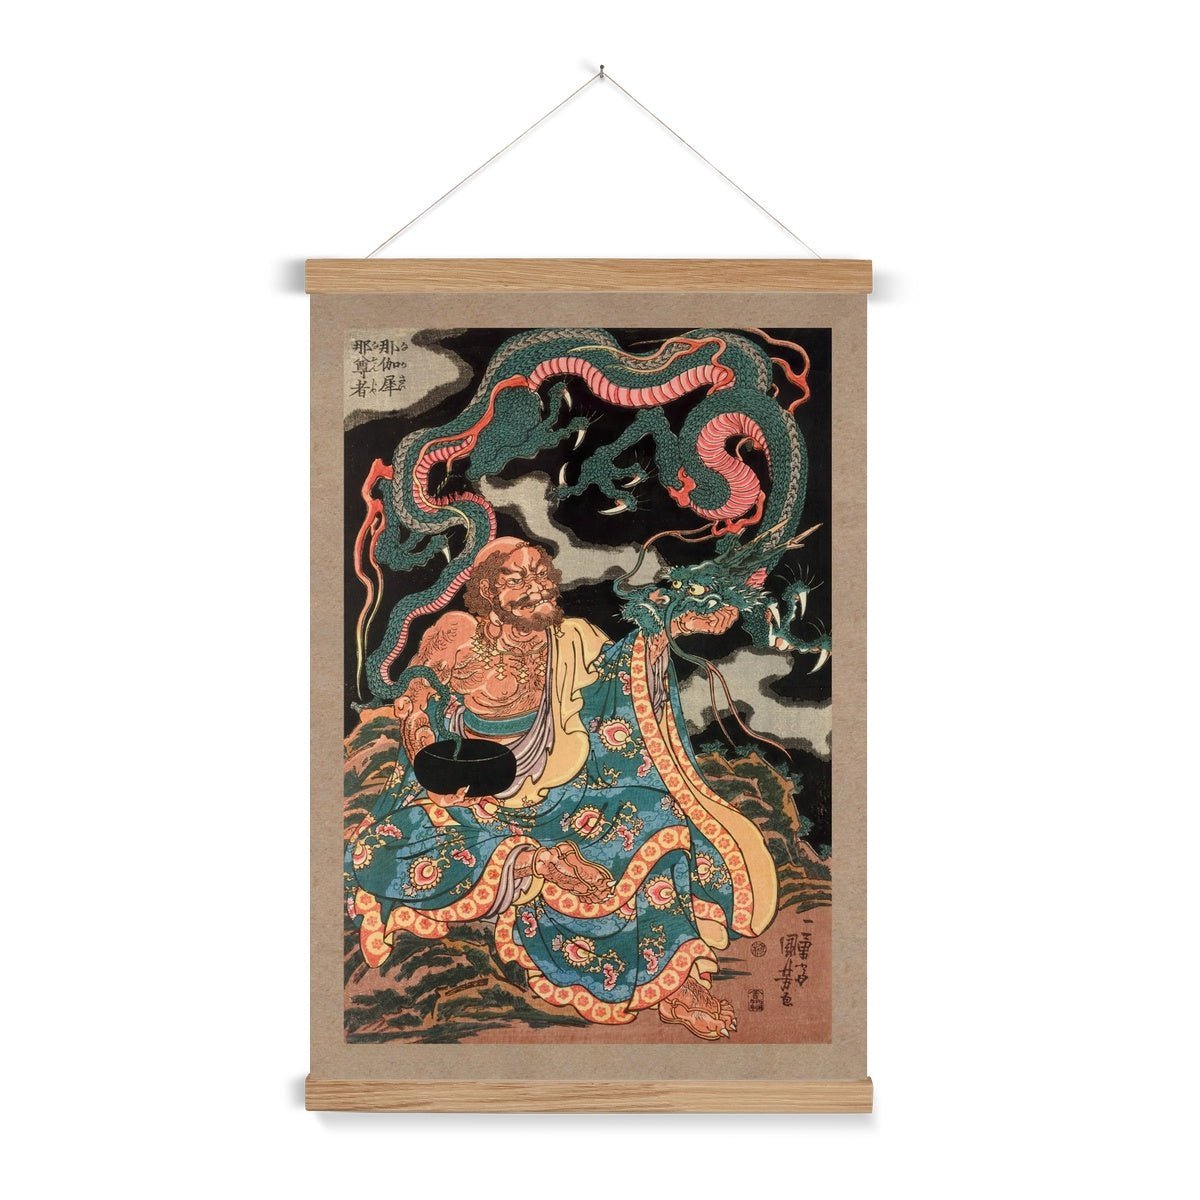 Fine art 6"x8" / Natural Frame The Arhat Nakasaina Sonja Seated On a Rock, with a Dragon Emerging From His Bowl, Vintage Buddhist Japanese Fine Art Print with Hanger